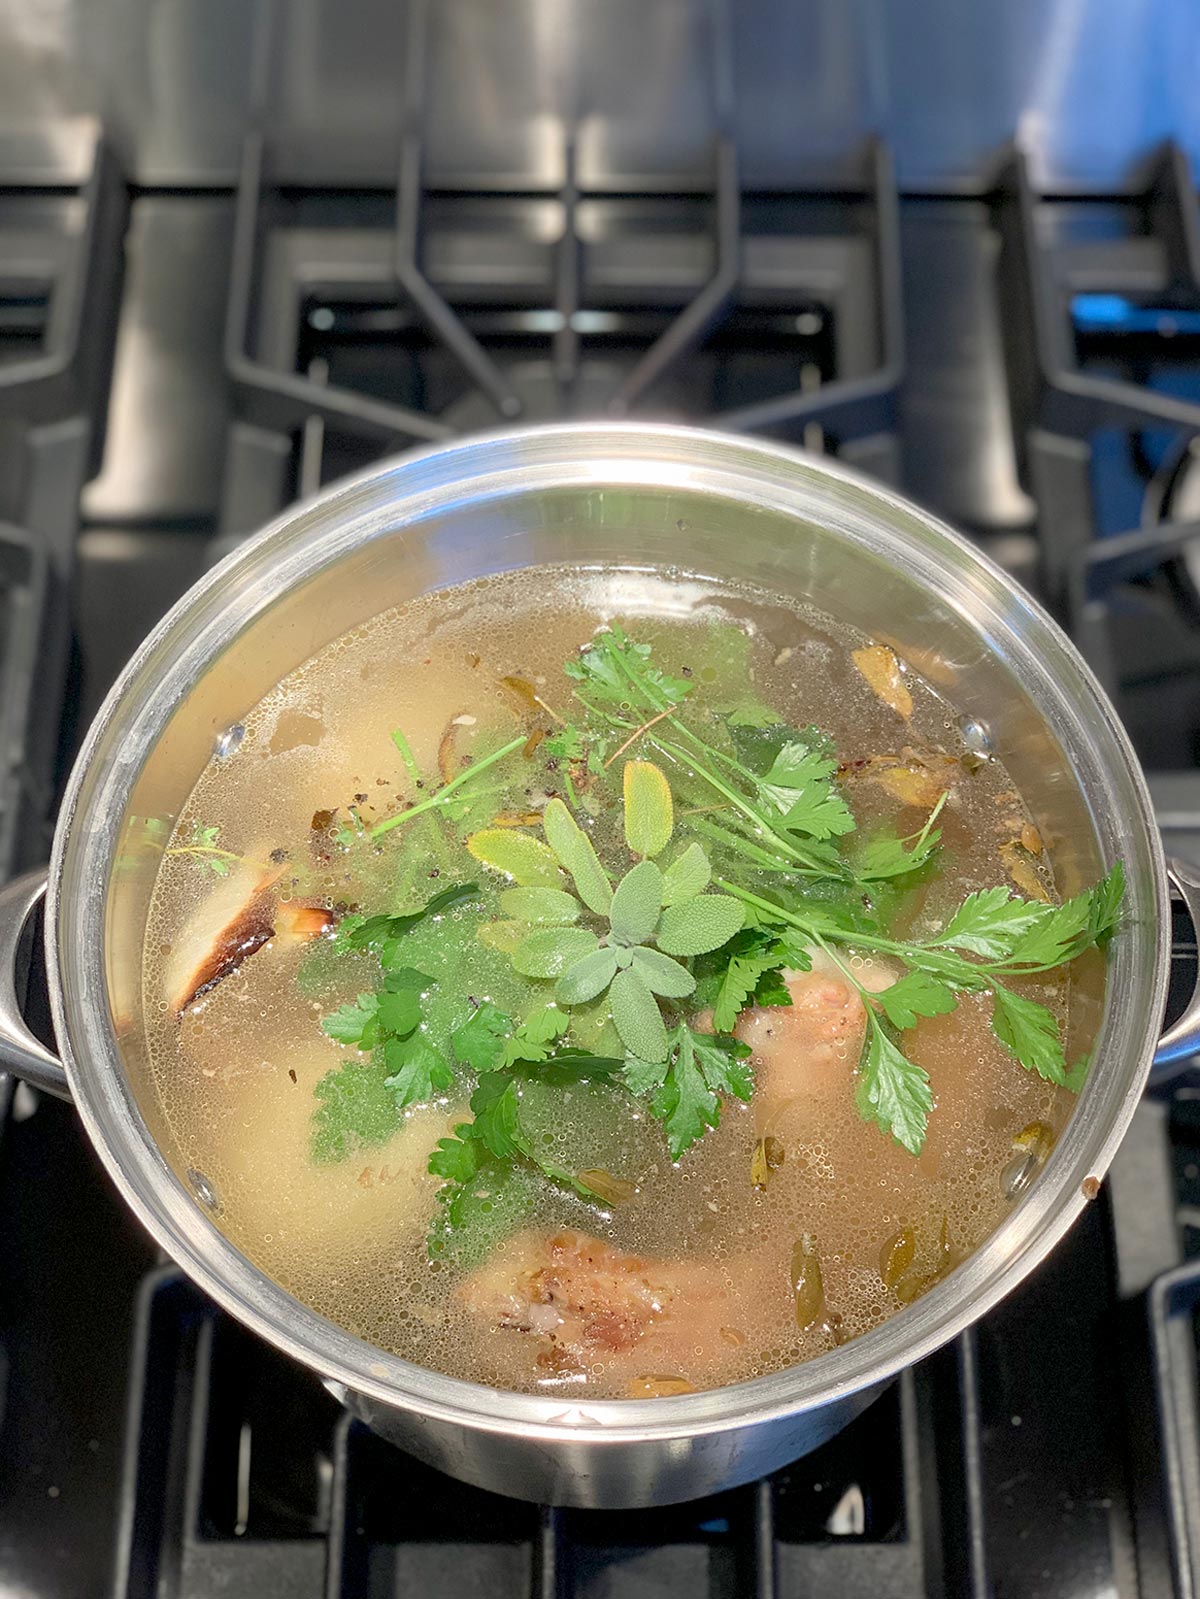 Water, roasted turkey and vegetables and fresh herbs in a large stock pot.